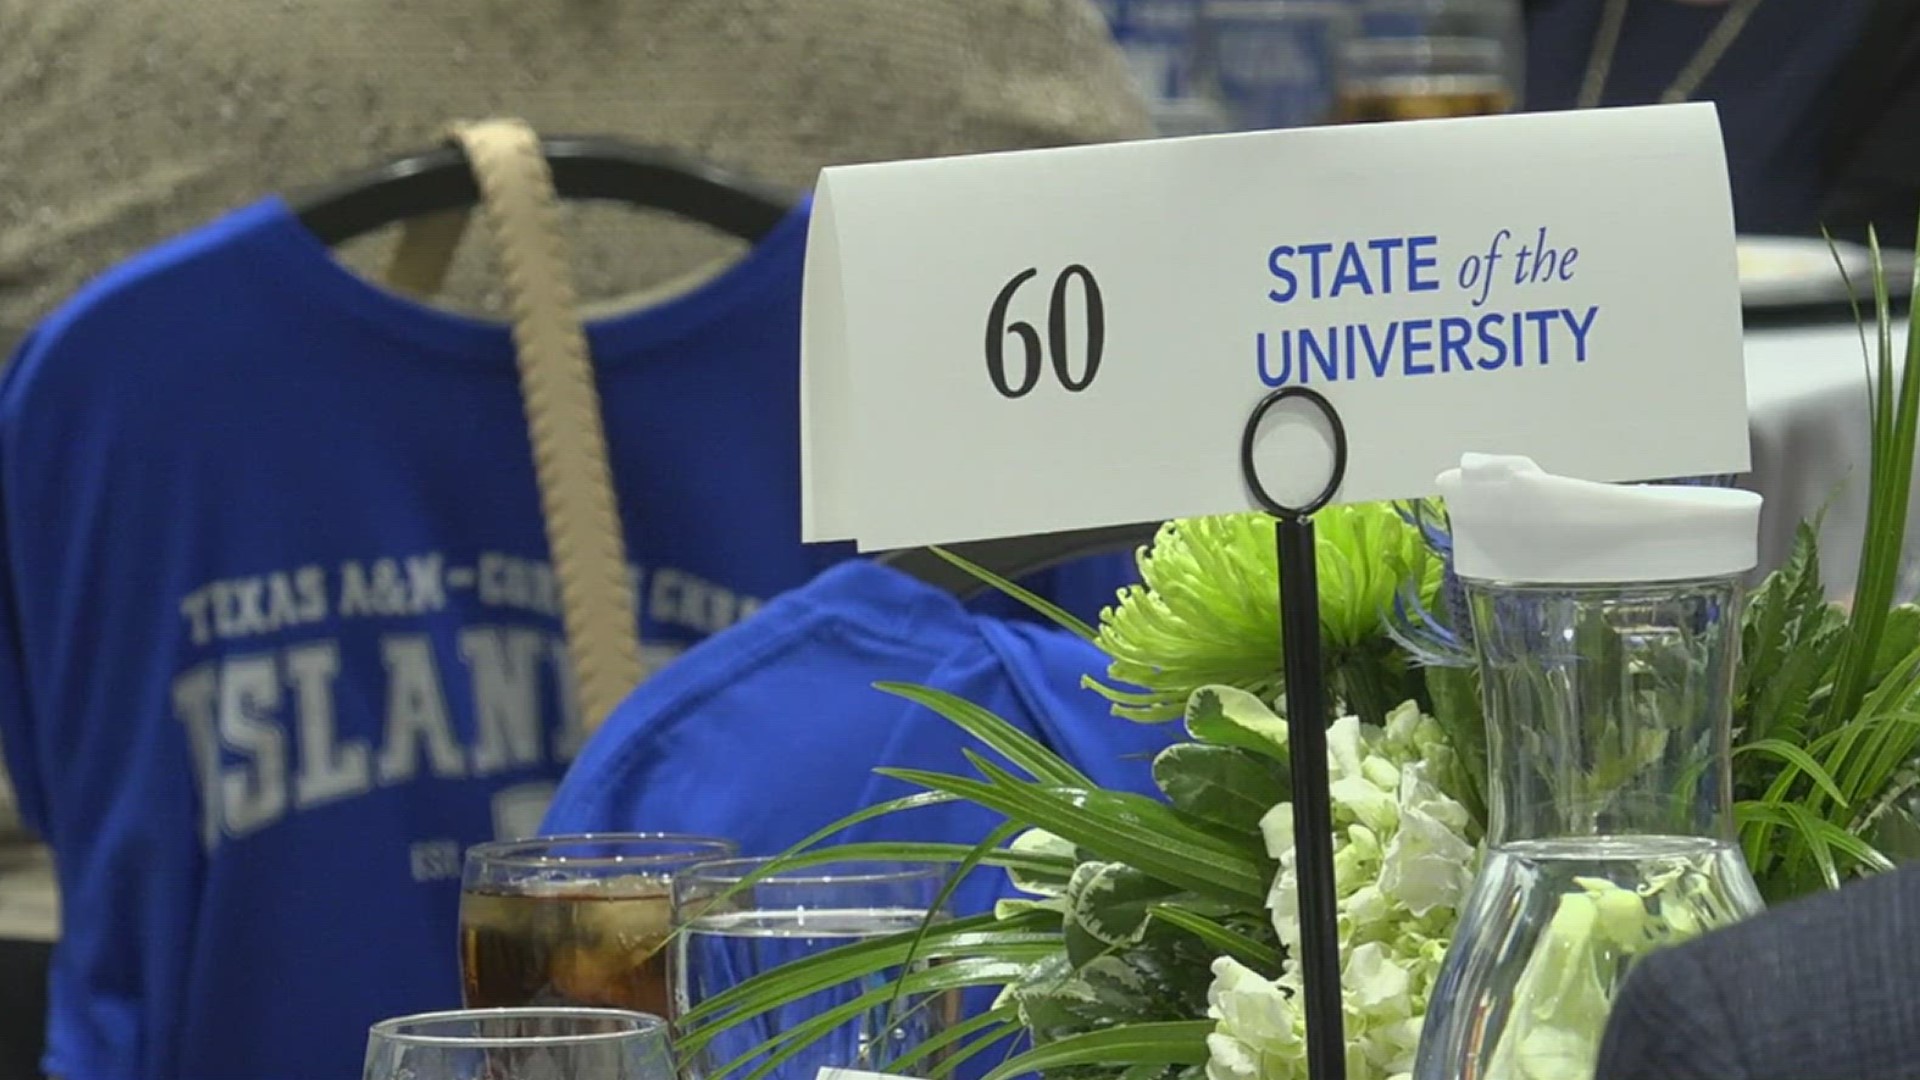 TAMUCC hosted a 'State of the University' address to highlight their growth and discuss where the university is heading.